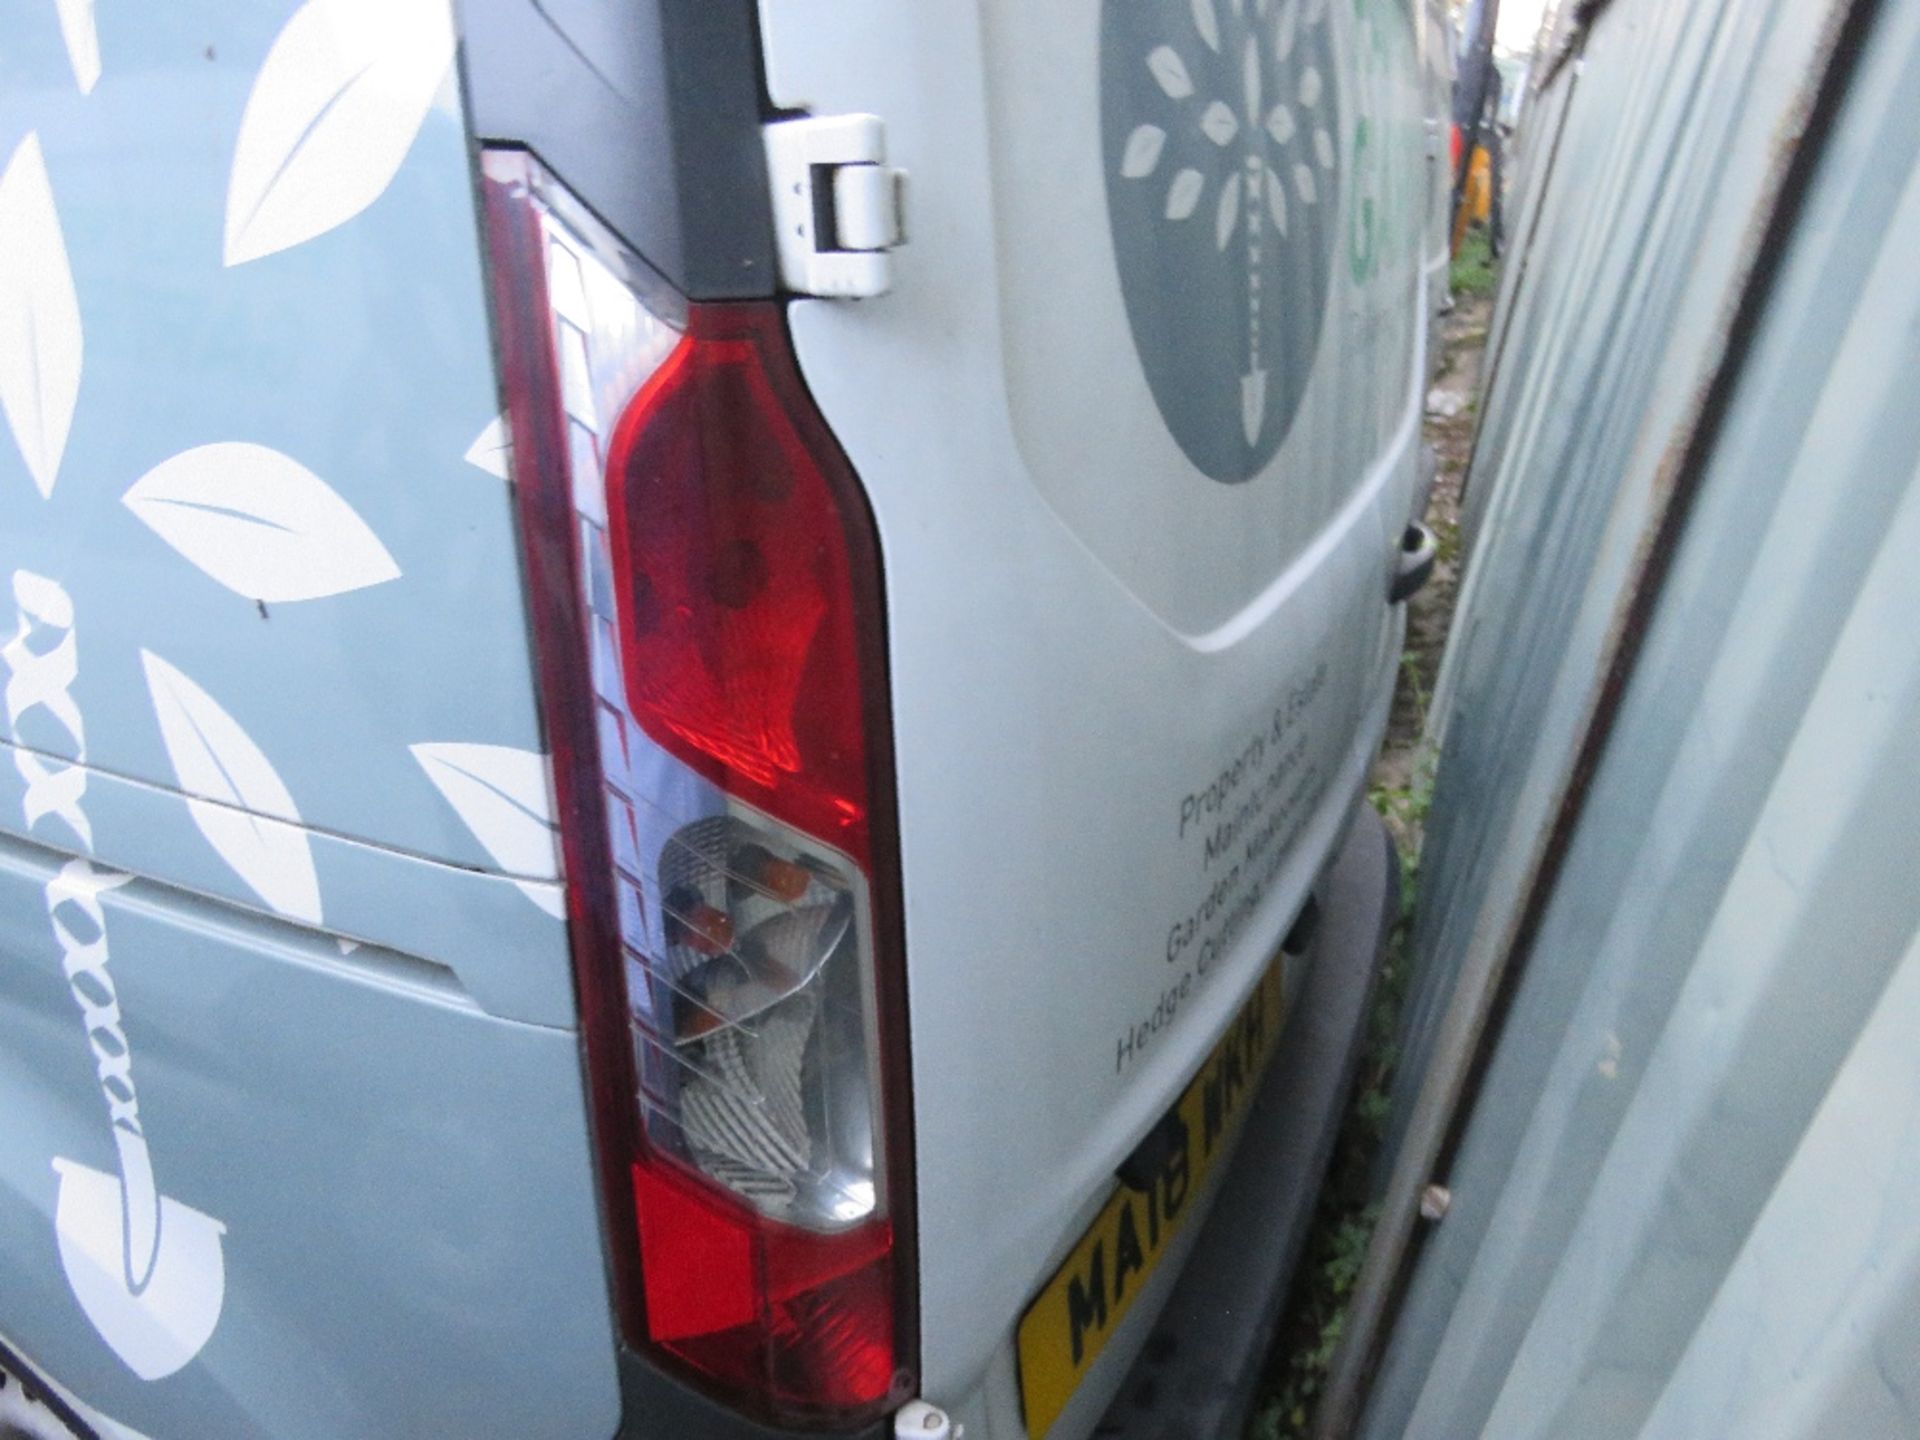 FORD TRANSIT CONNECT PANEL VAN REG:MA18 WKH WITH V5 (TEST RECENTLY EXPIRED), EUR0 6. 2 KEYS. 99,765 - Image 7 of 13